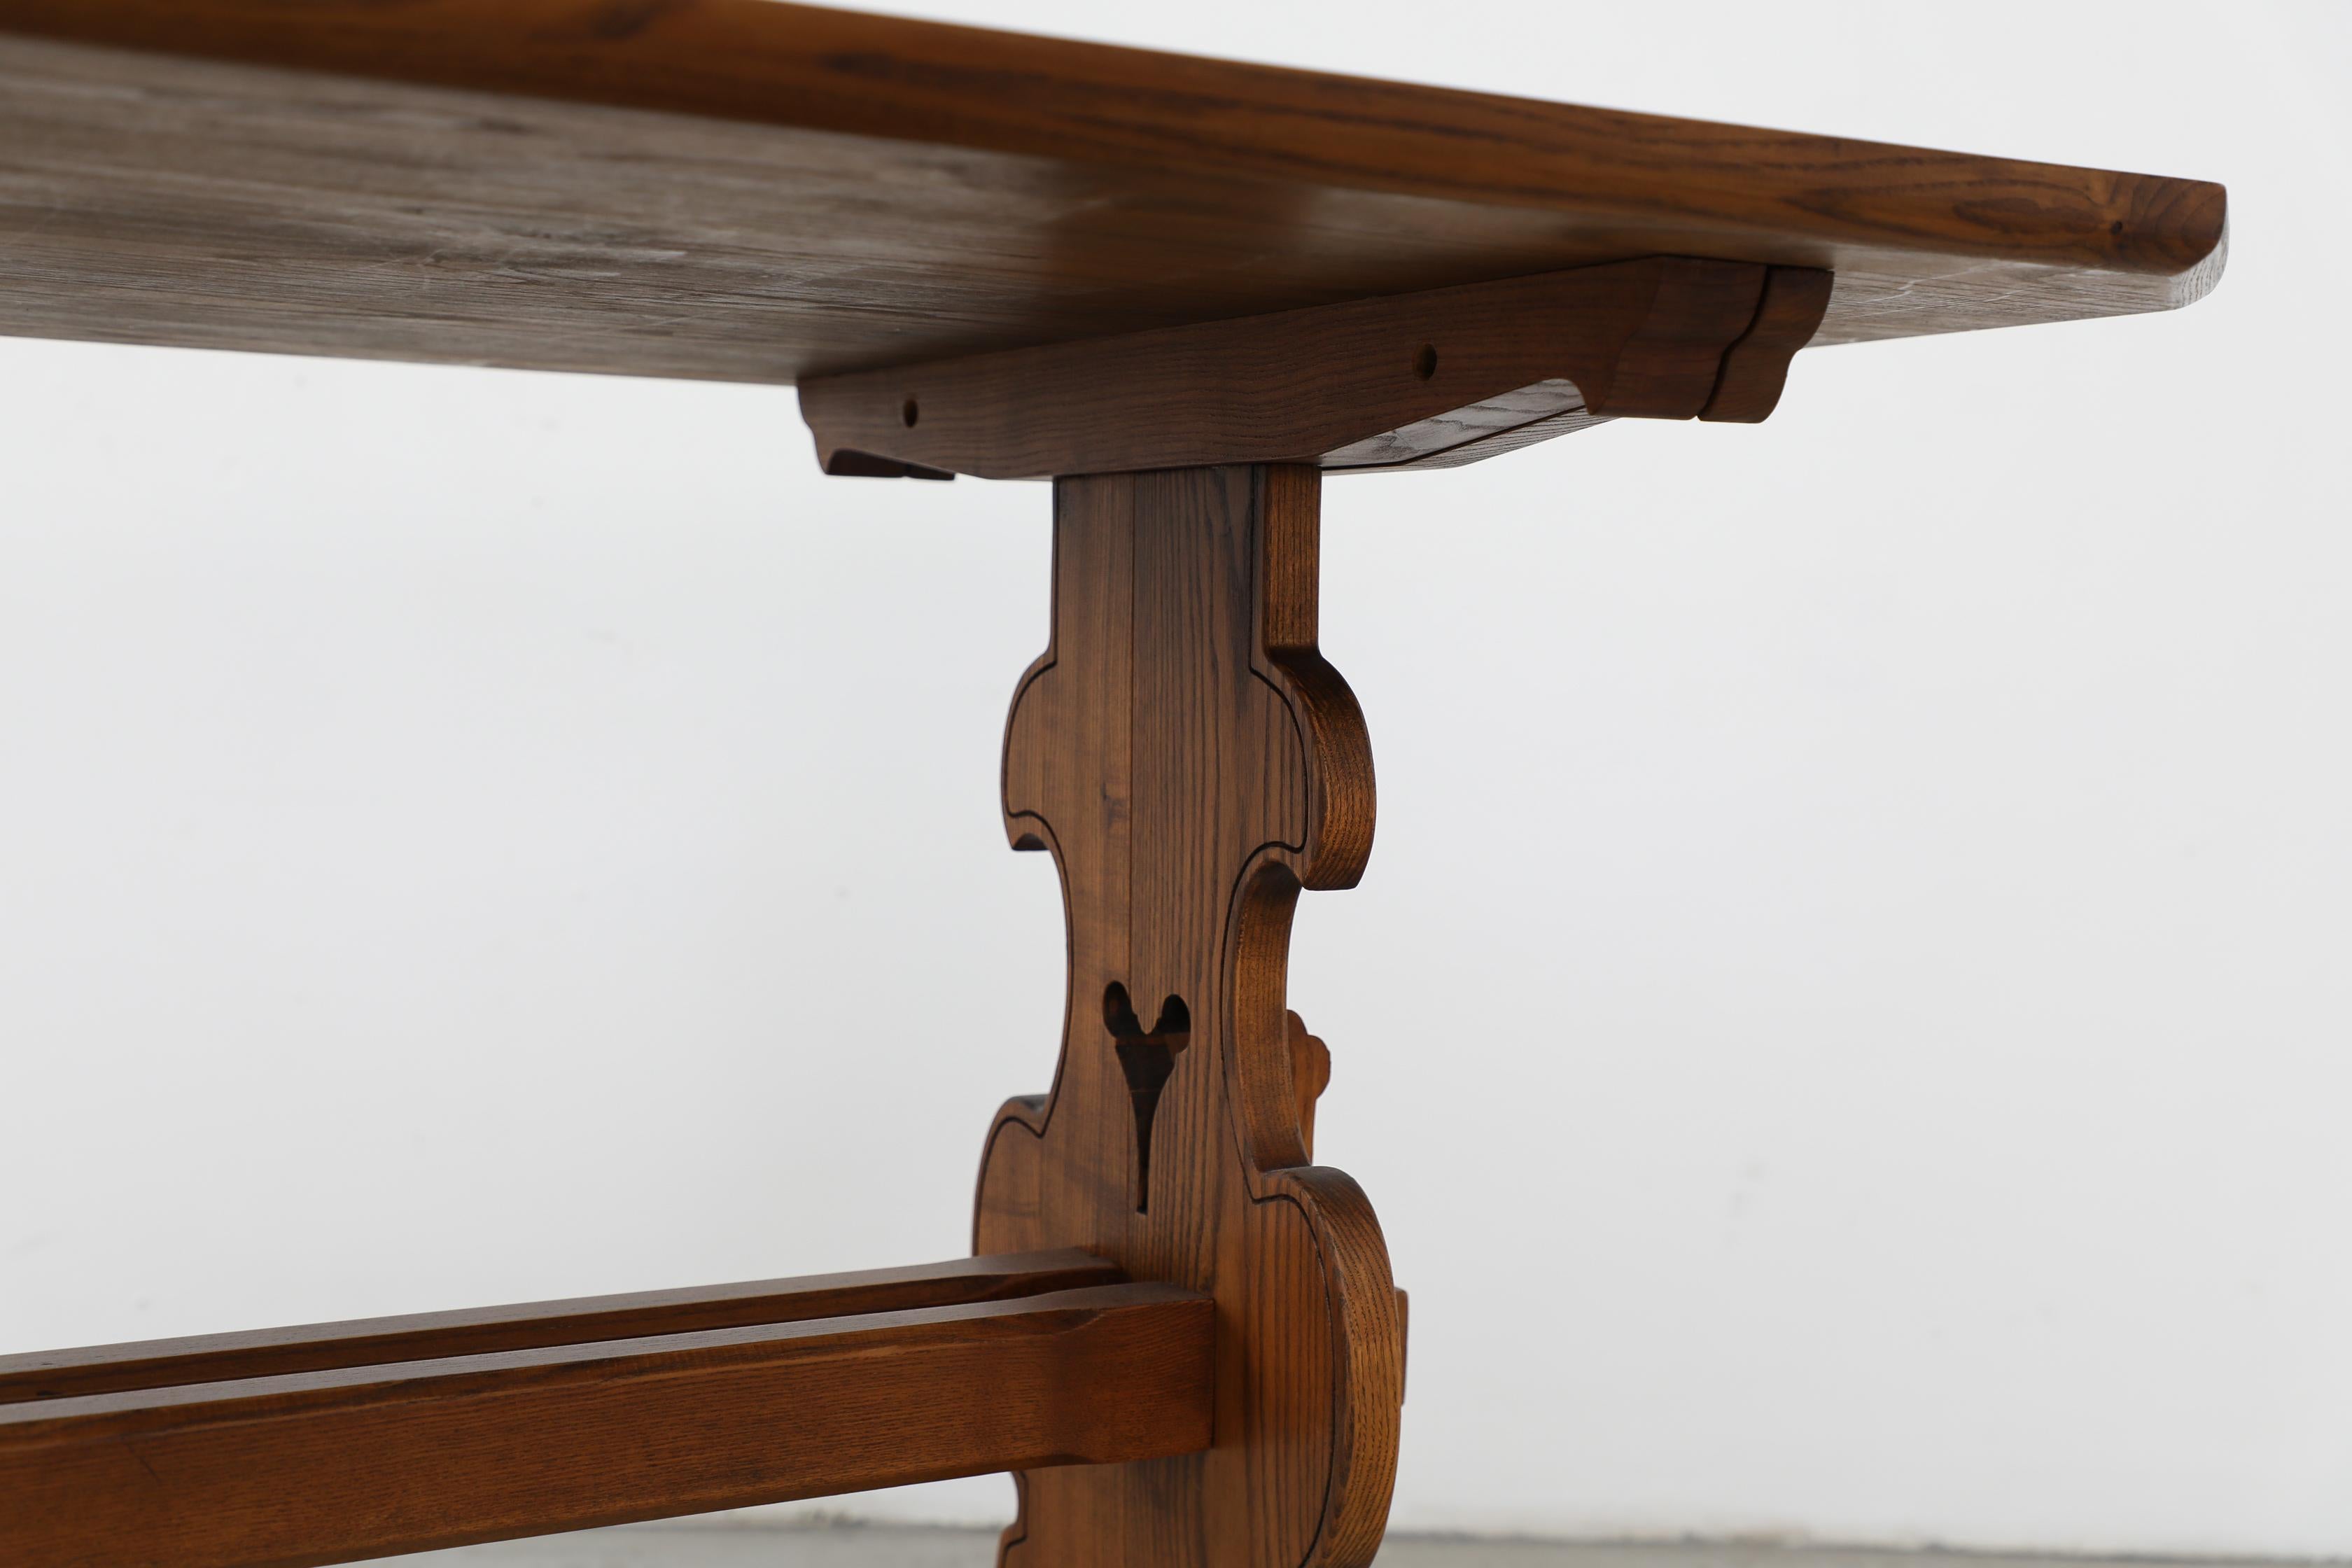 Austrian Ornate Brutalist Tyrolean Style Dark Pine Table with Angled Corners For Sale 5